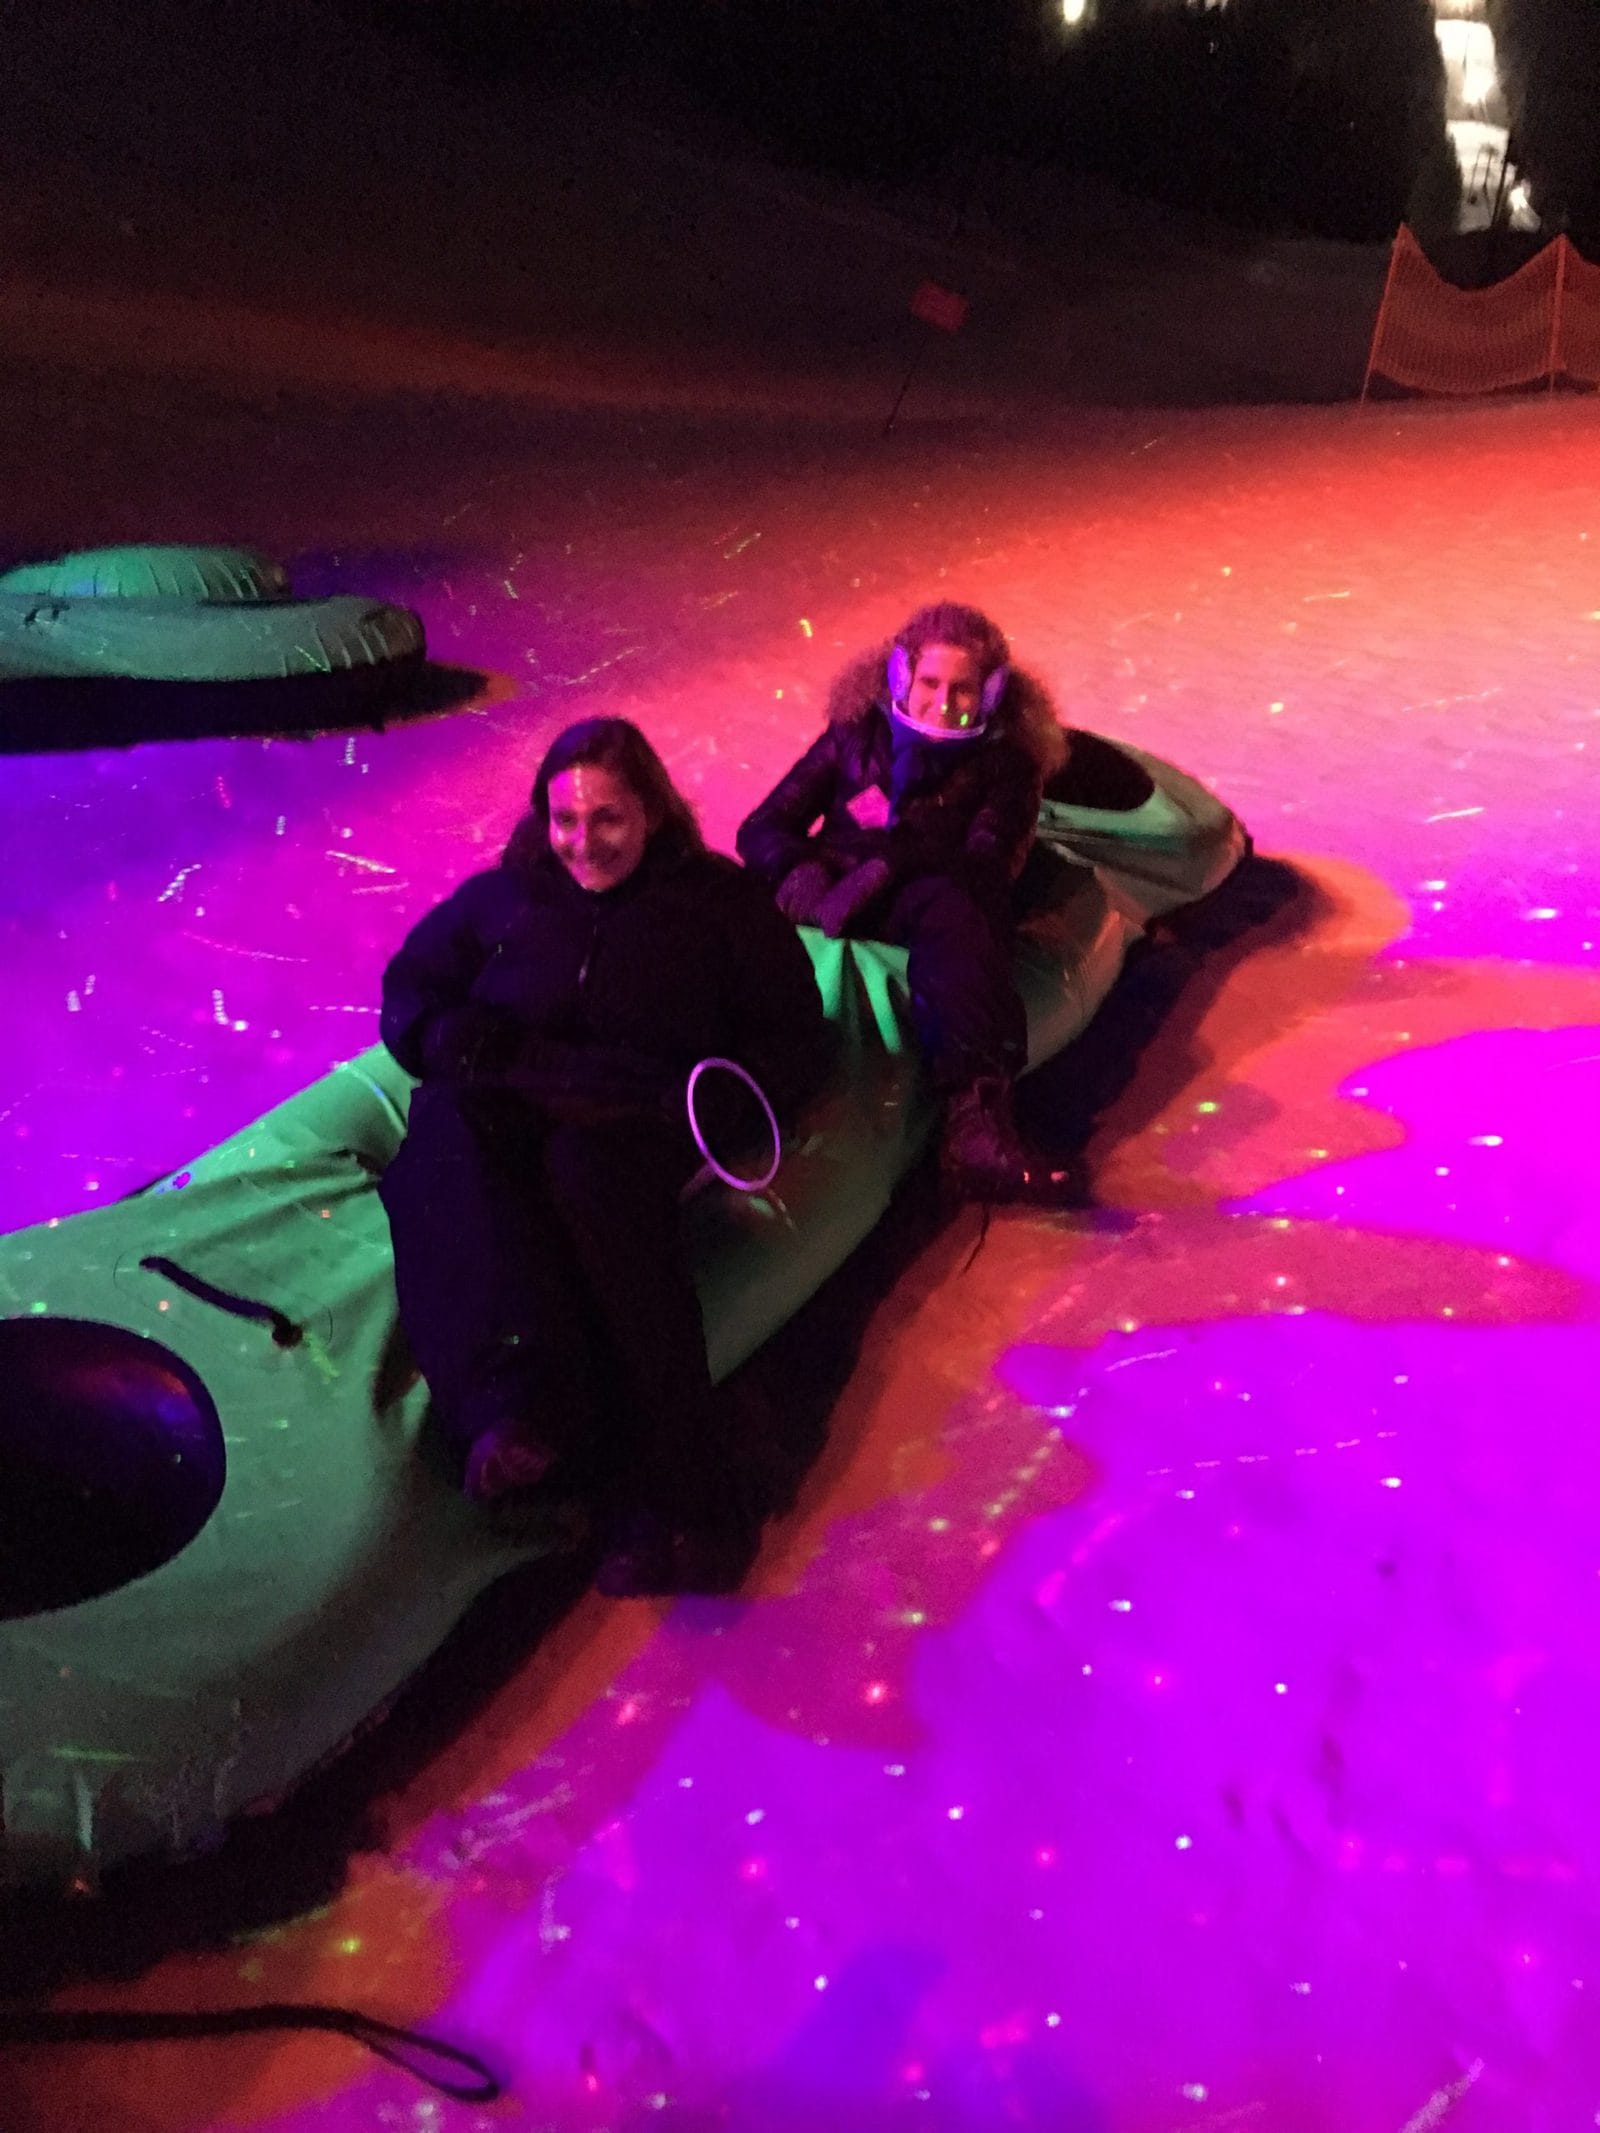 Ari and Lauren test out a multi-seater snow tube under the lights of "cosmic snow tubing".